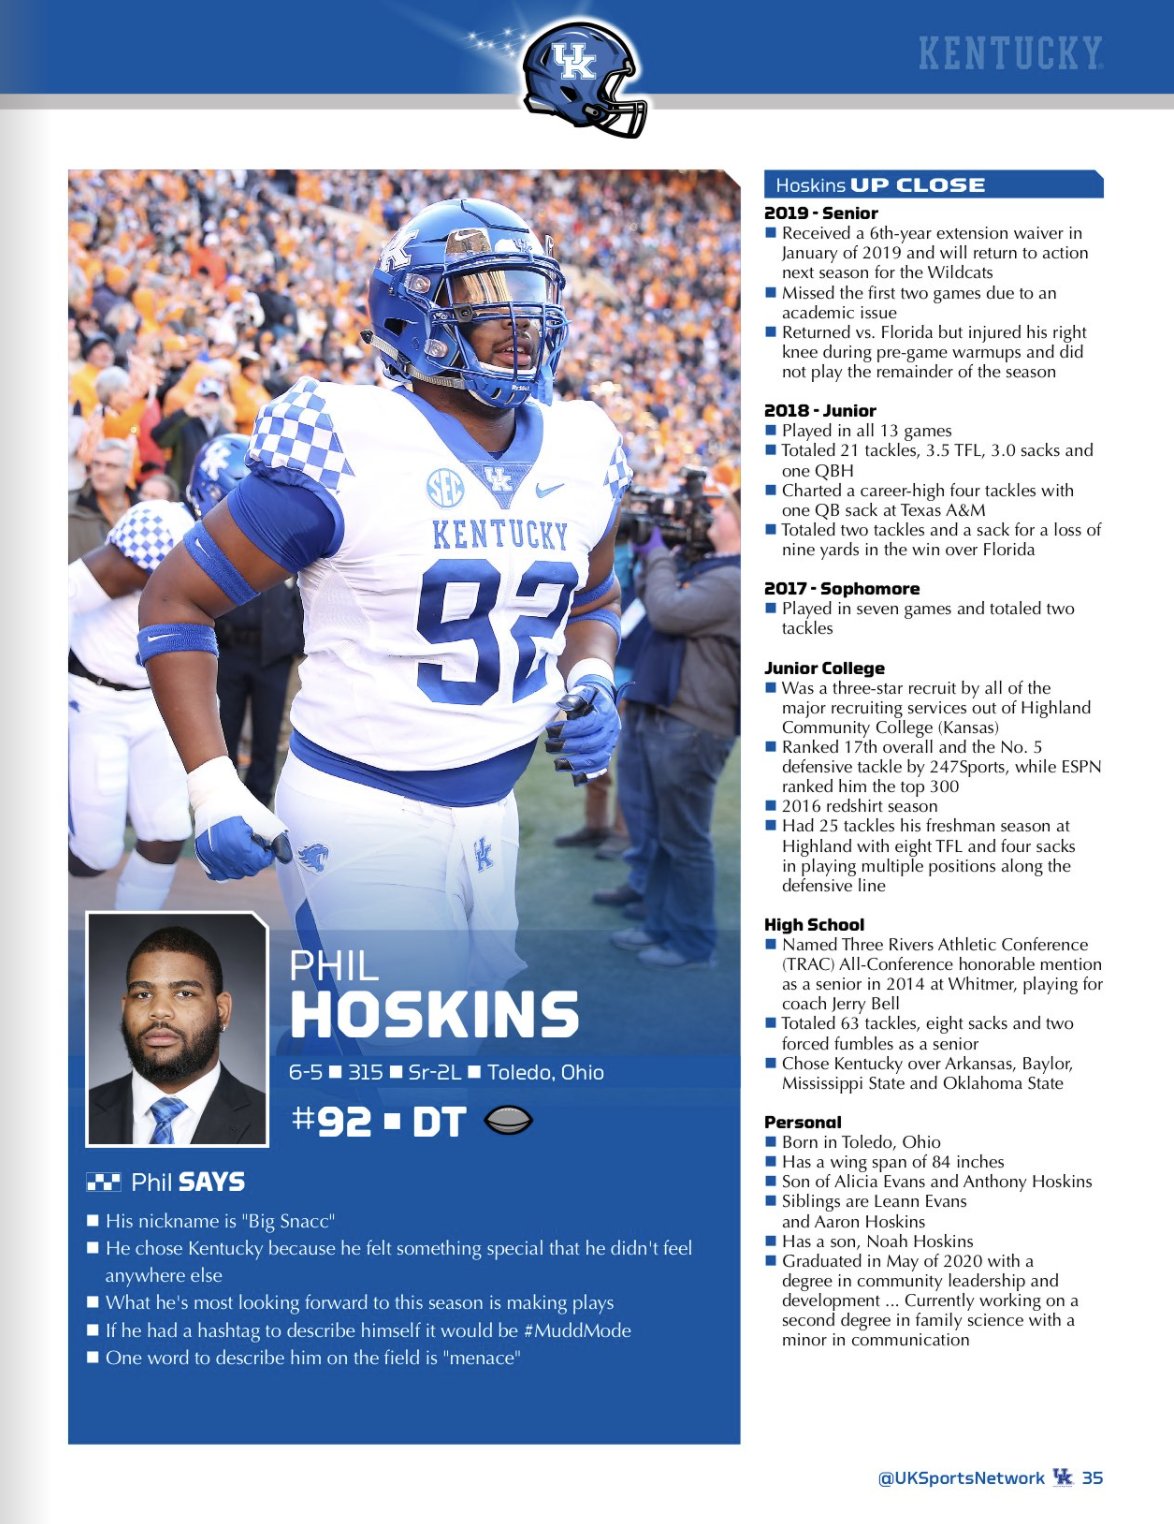 UK Sports Network on Twitter: "Did you know @phil_hoskins already has degree under his belt and is currently on his second? Learn more about your @UKFootball team in the